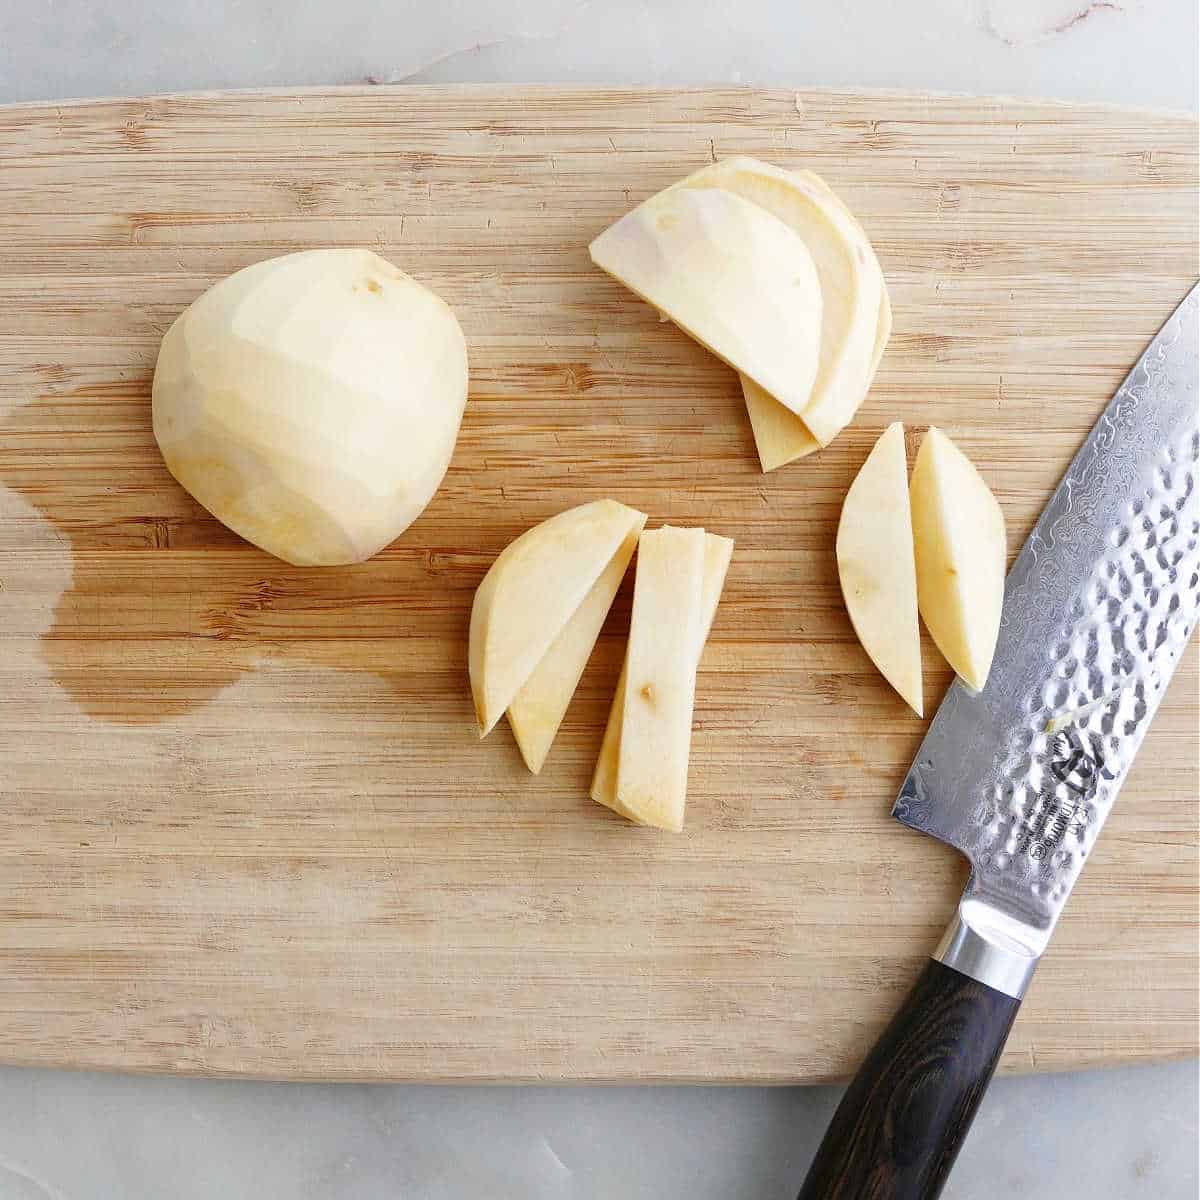 rutabaga being sliced into fries with a knife on a cutting board